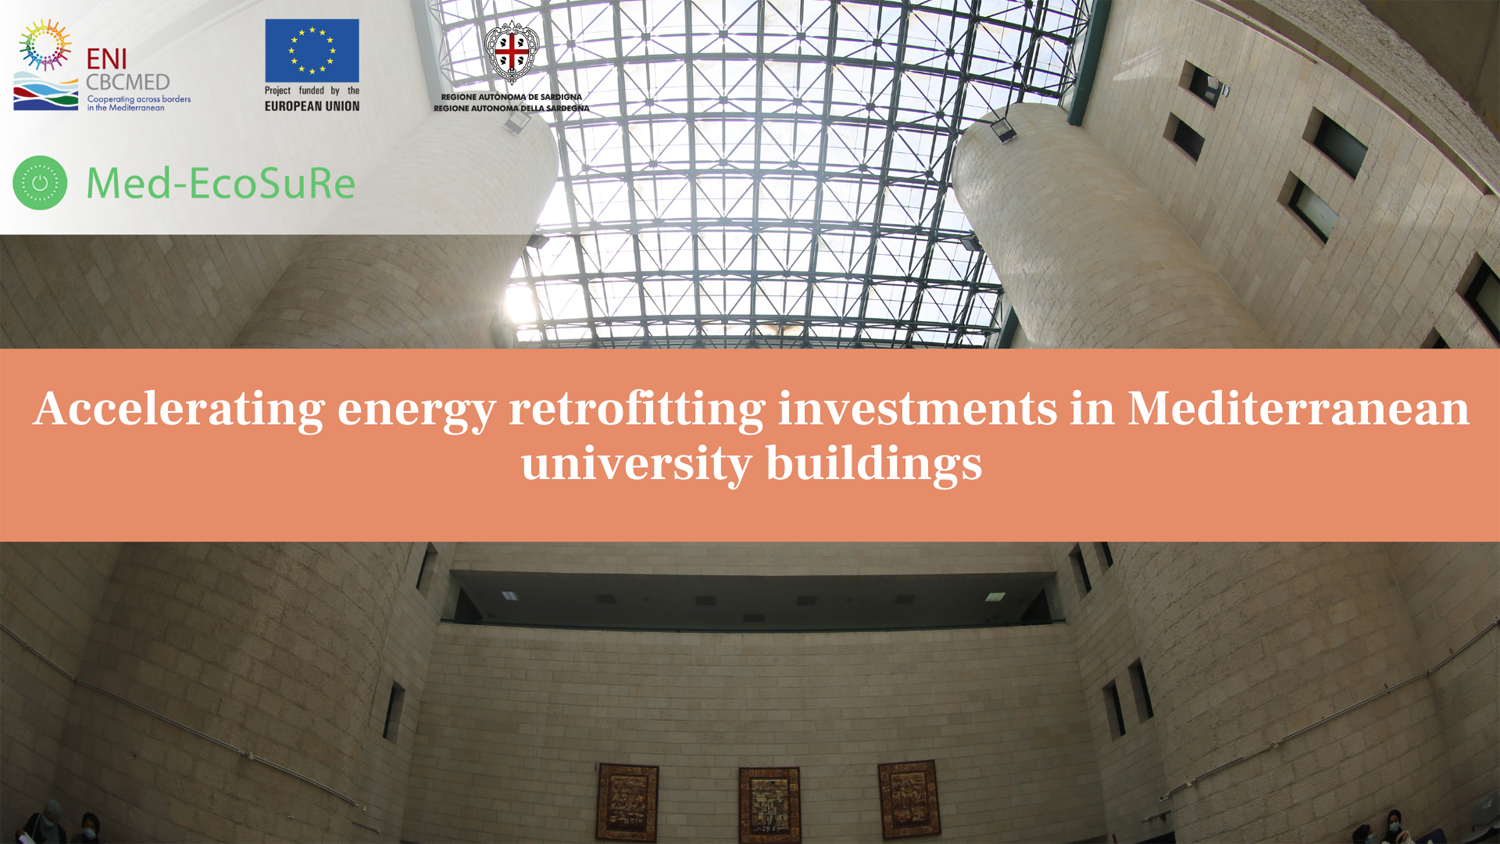 Med-EcoSuRe supporting retrofit investments acceleration in Mediterranean university buildings